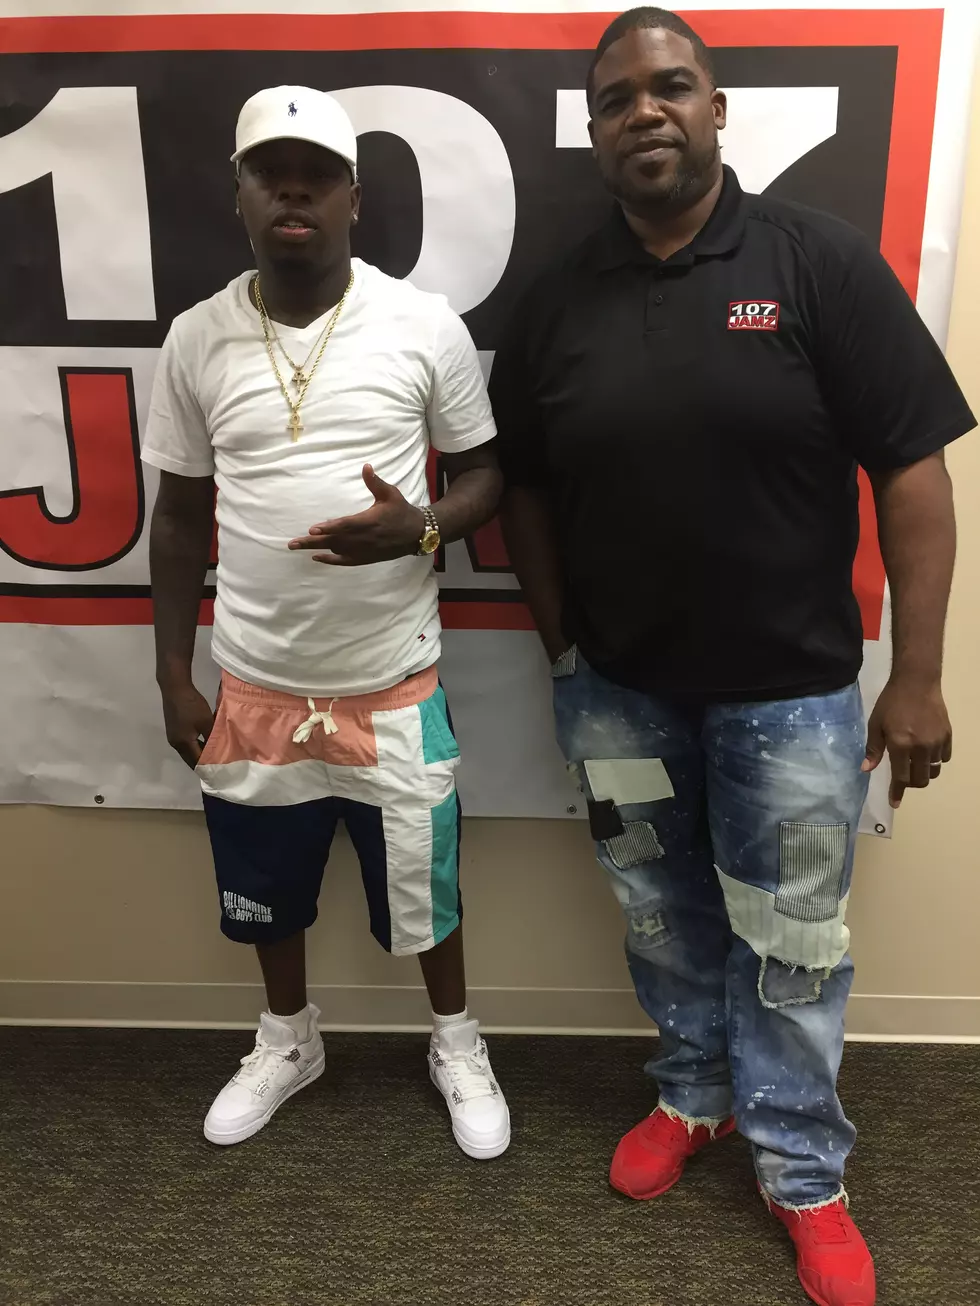 Mista Cain Stopped By To Talk With Me Today About New Music [PHOTO]